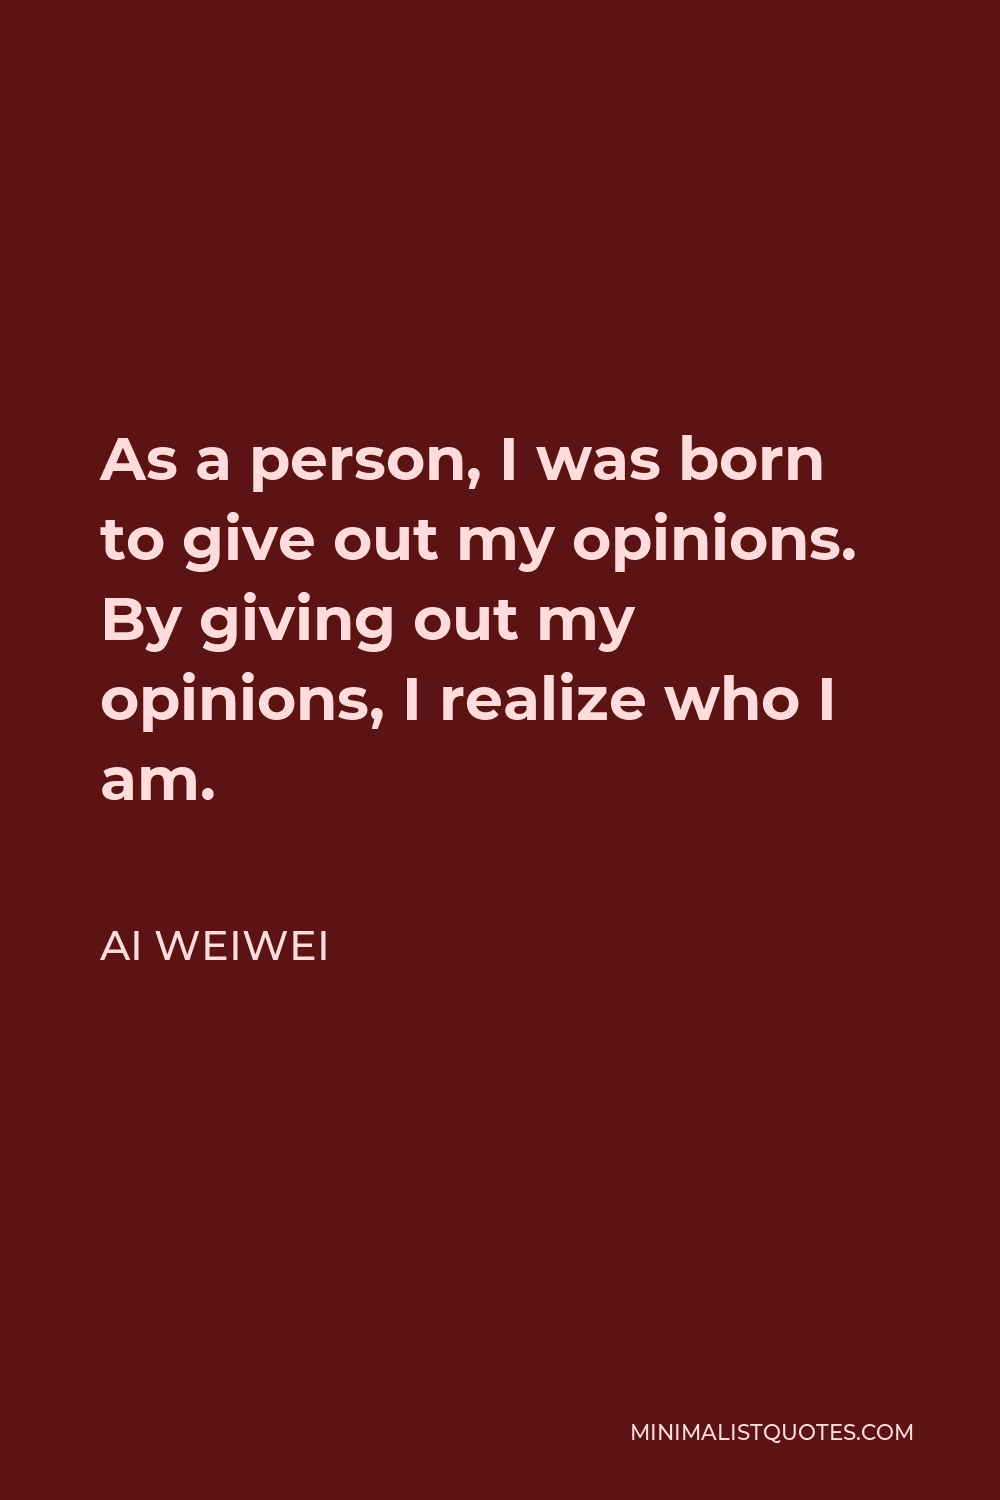 Ai Weiwei Quote - As a person, I was born to give out my opinions. By giving out my opinions, I realize who I am.